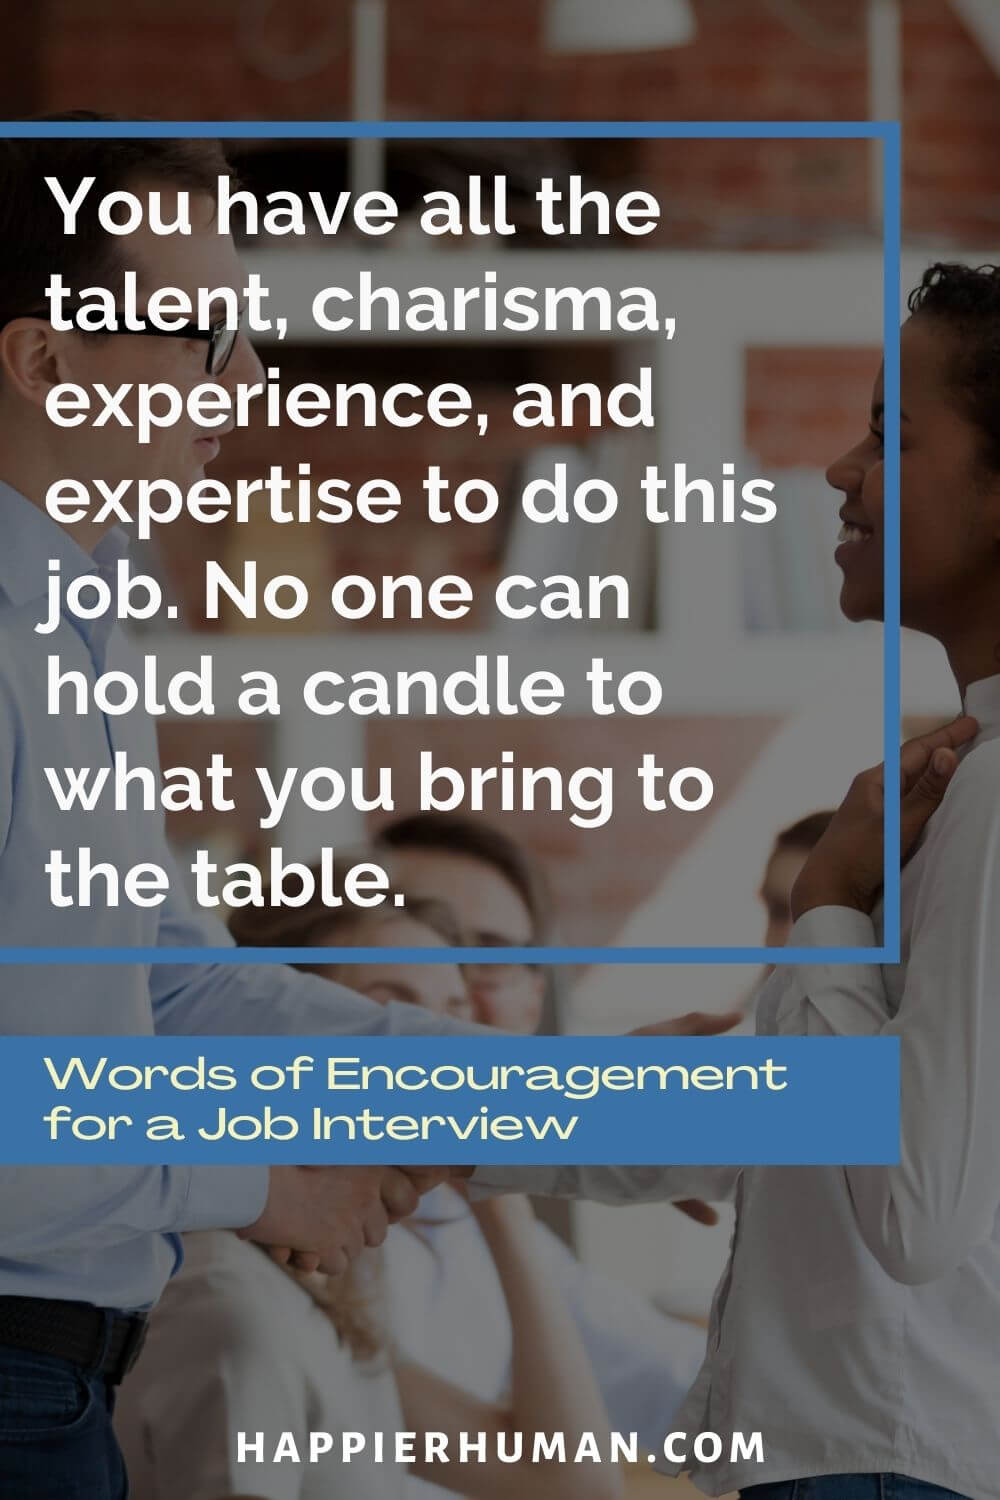 55 Good Luck Words of Encouragement for a Job Interview - Happier Human